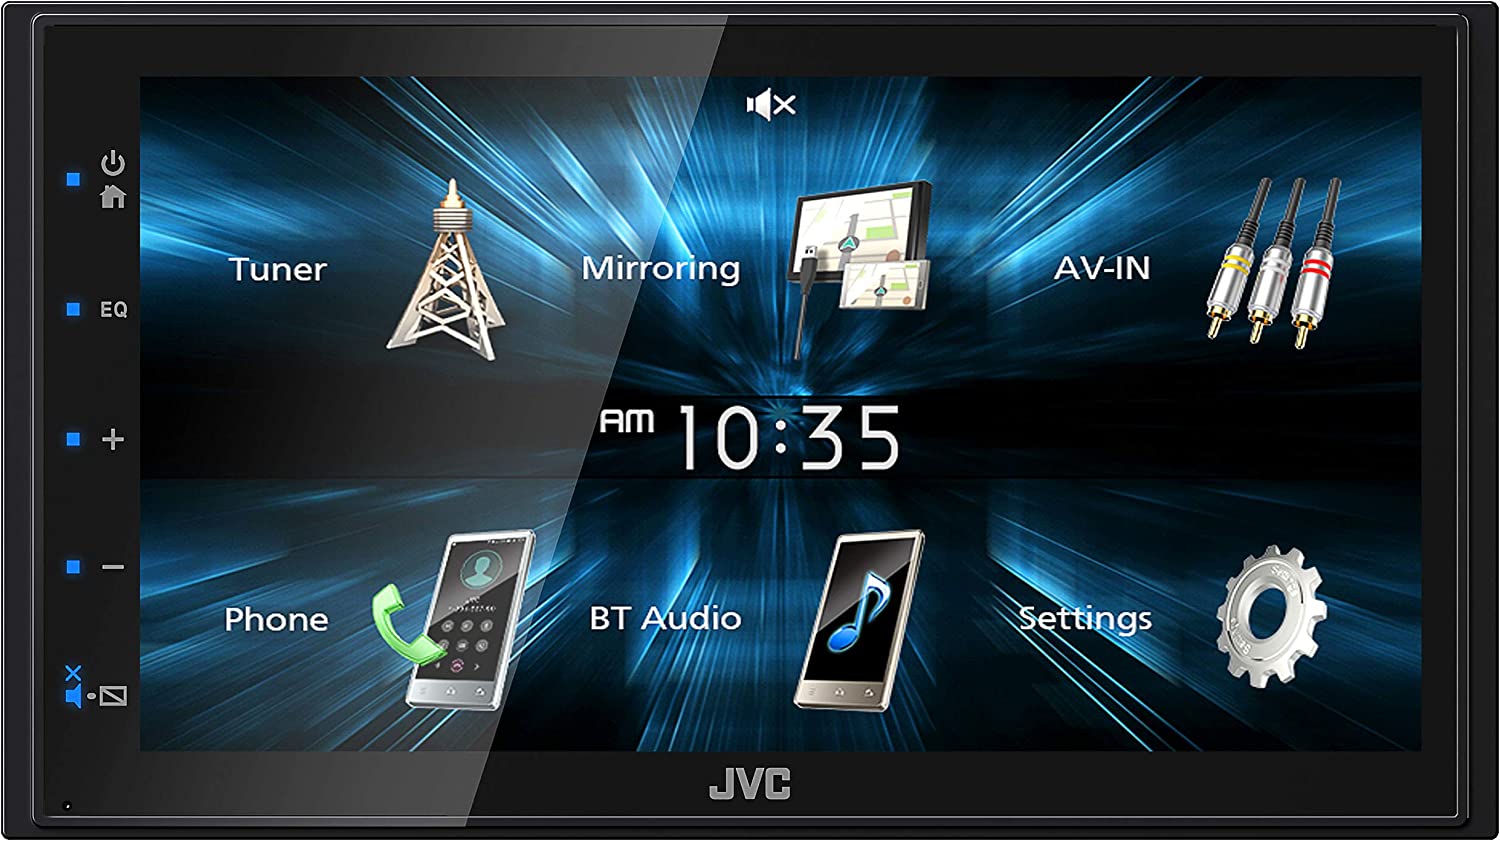 JVC KW-M150BT Bluetooth Car Stereo Receiver with USB Port 6.75" Touchscreen Display AM/FM Radio MP3 Player Double DIN 13-Band EQ